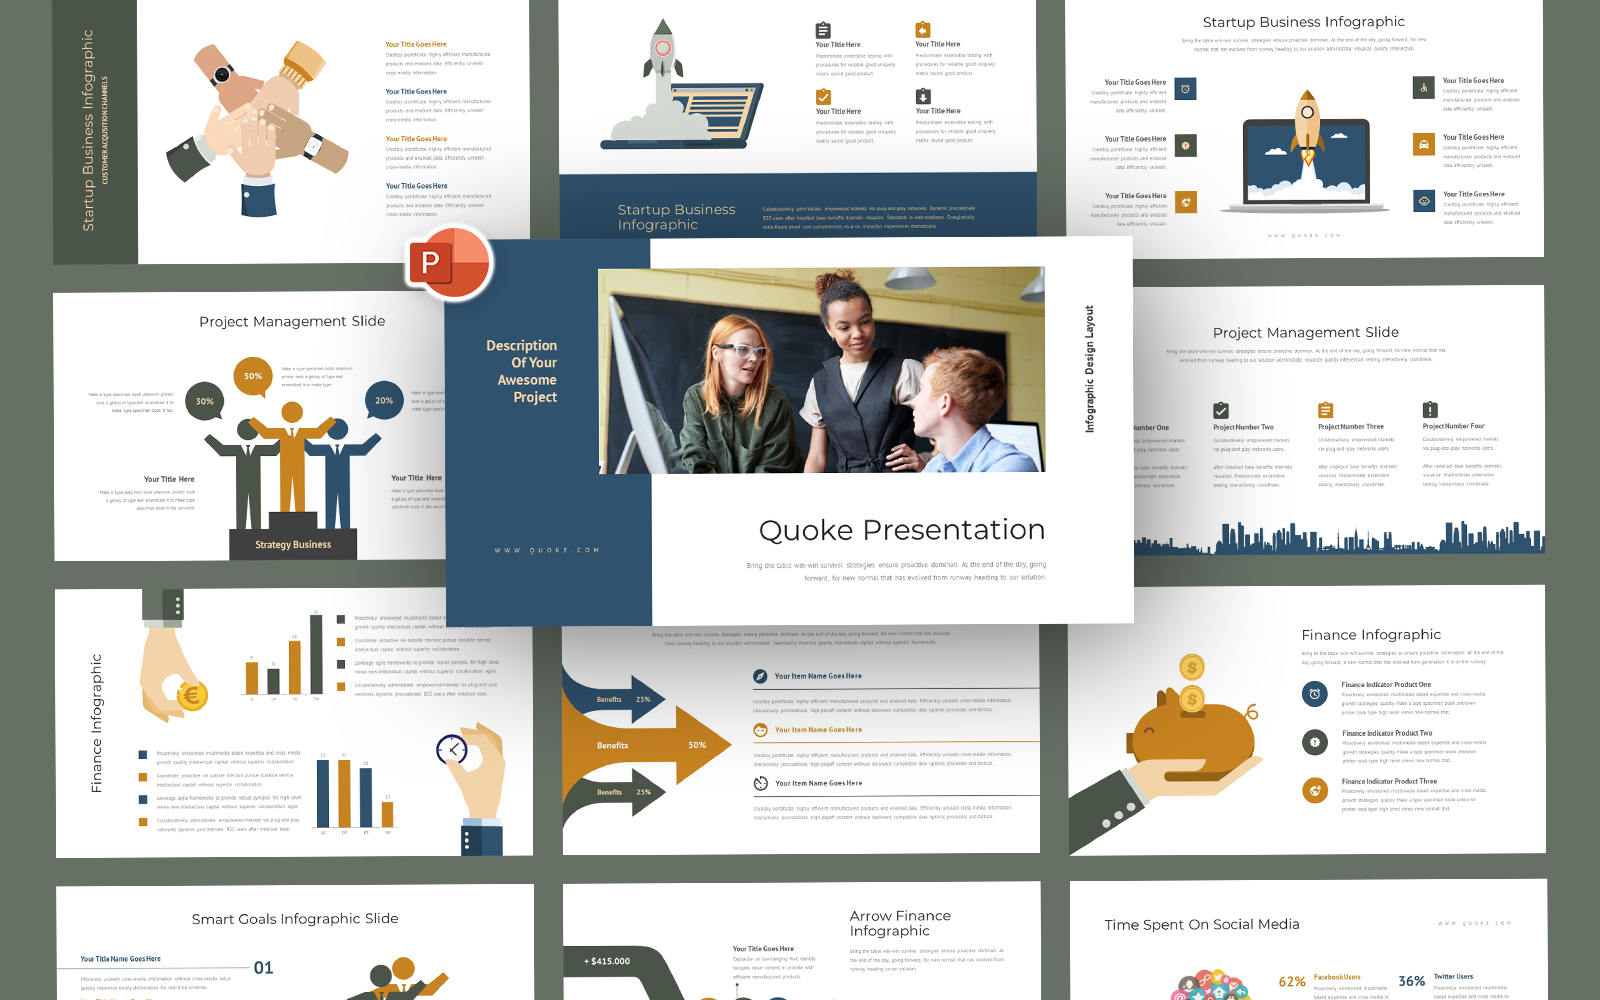 Quoke Business Infographic PowerPoint Template